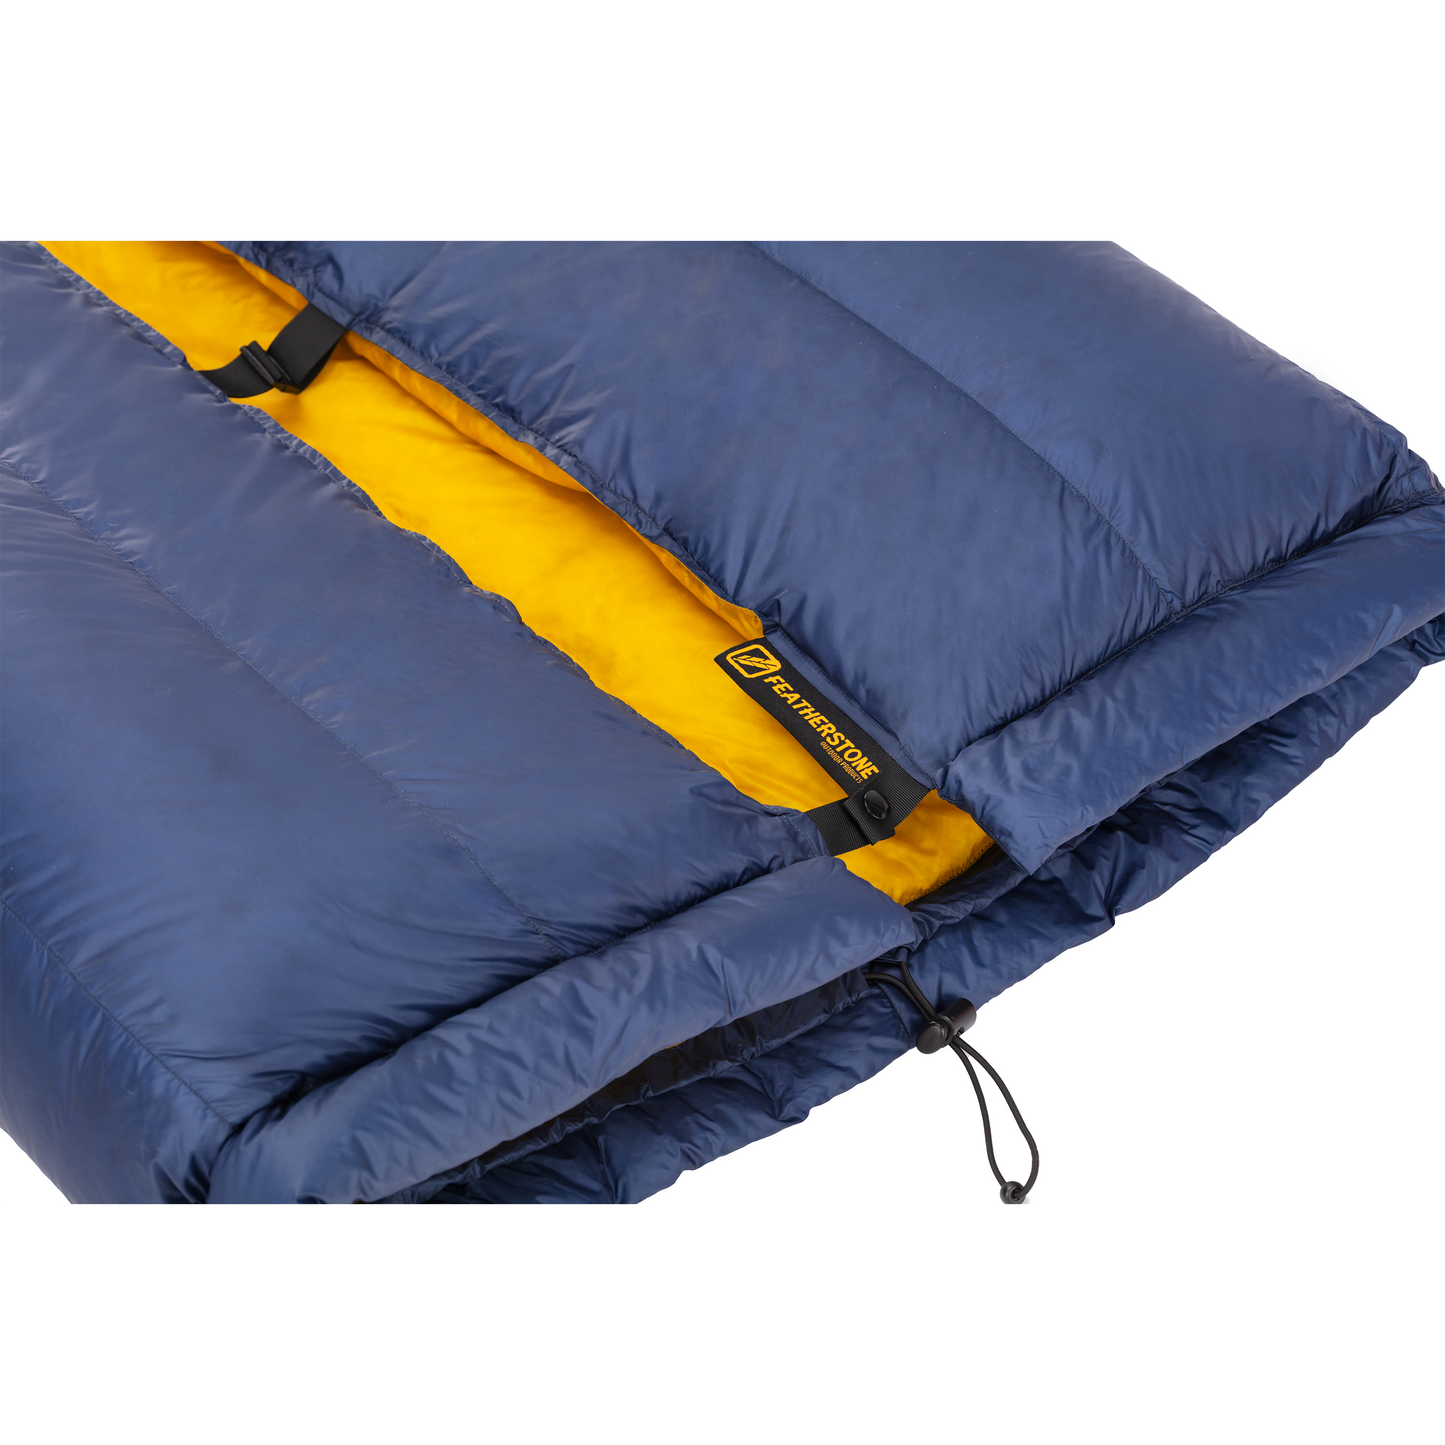 Sleeping Bags – Featherstone Outdoor